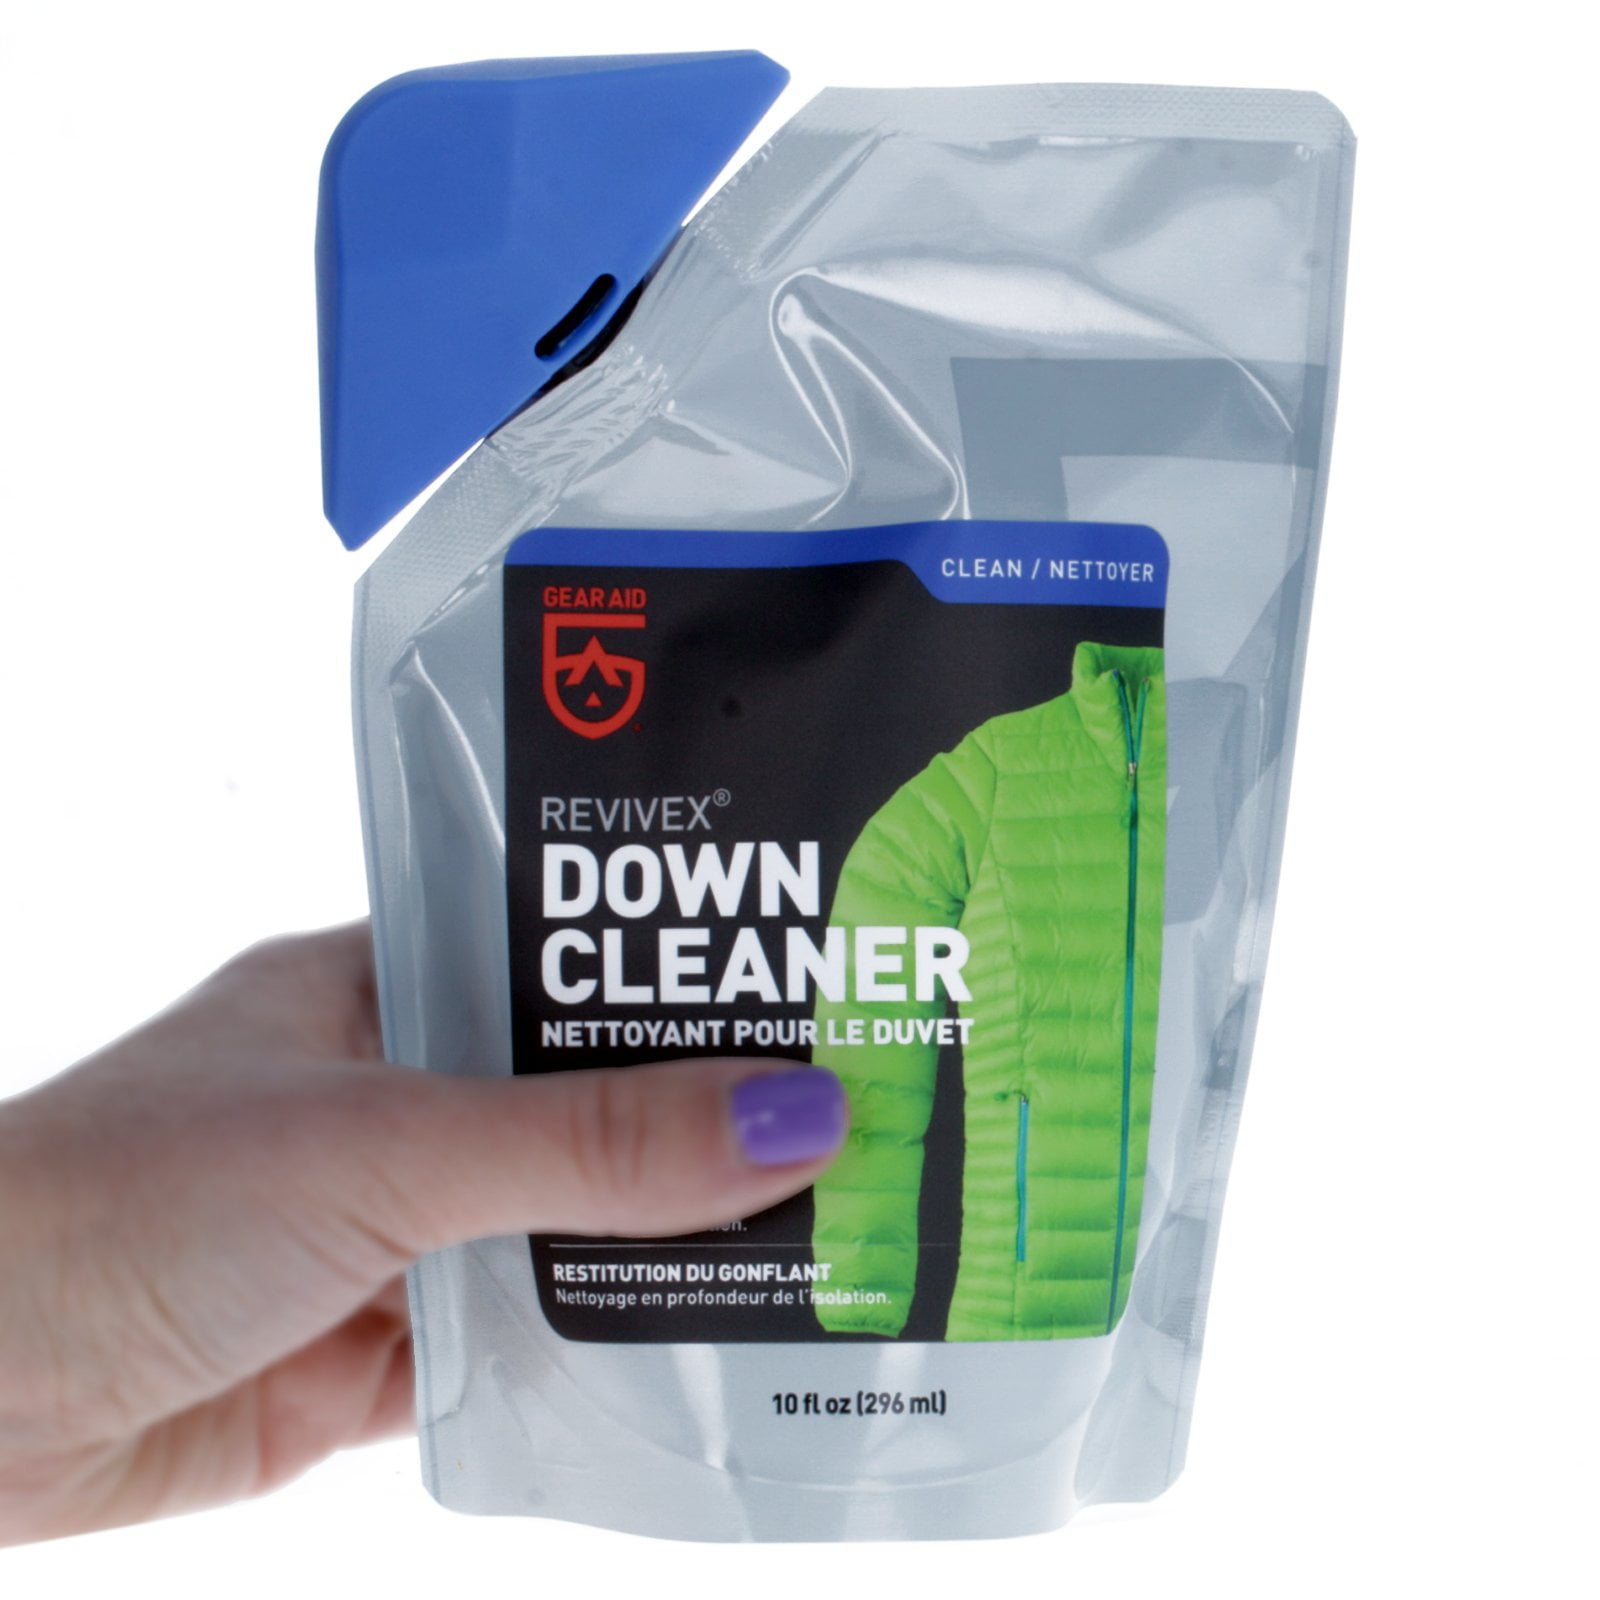  GEAR AID Revivex Down Care Kit for Jackets and Sleeping Bags,  with Down Cleaner, Water Repellent and Repair Patches, Clear, 10 oz  cleaner, 10 oz DWR, 1.5 x 2.5 patches 